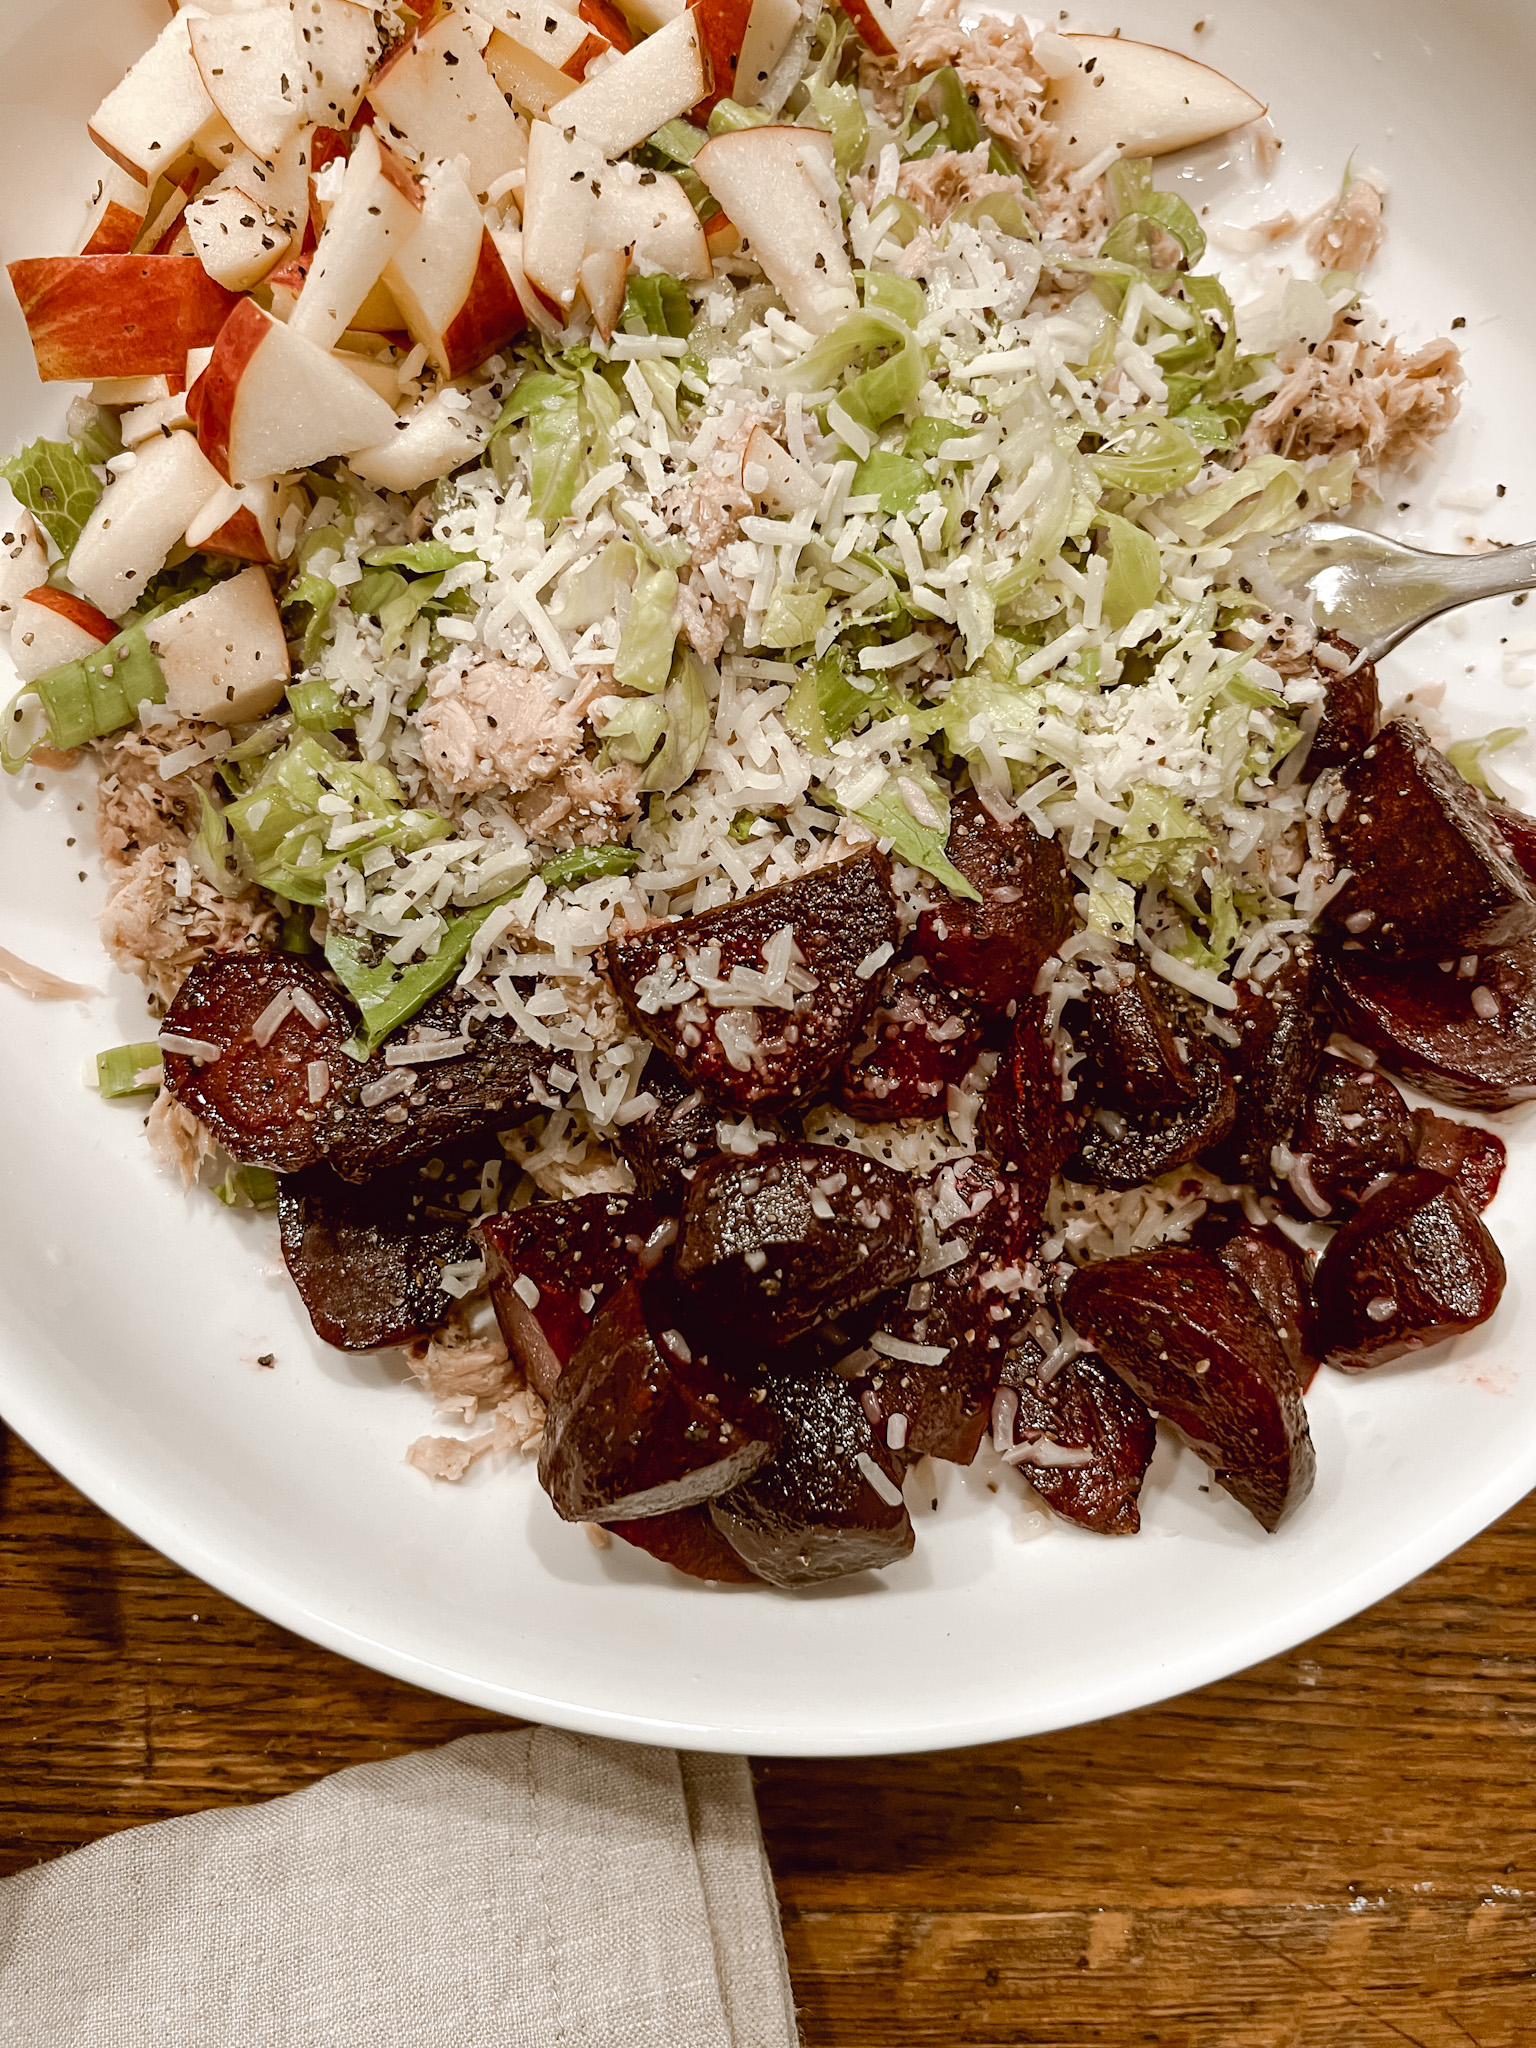 Delicious Beet and Apple Salad - Deb and Danelle